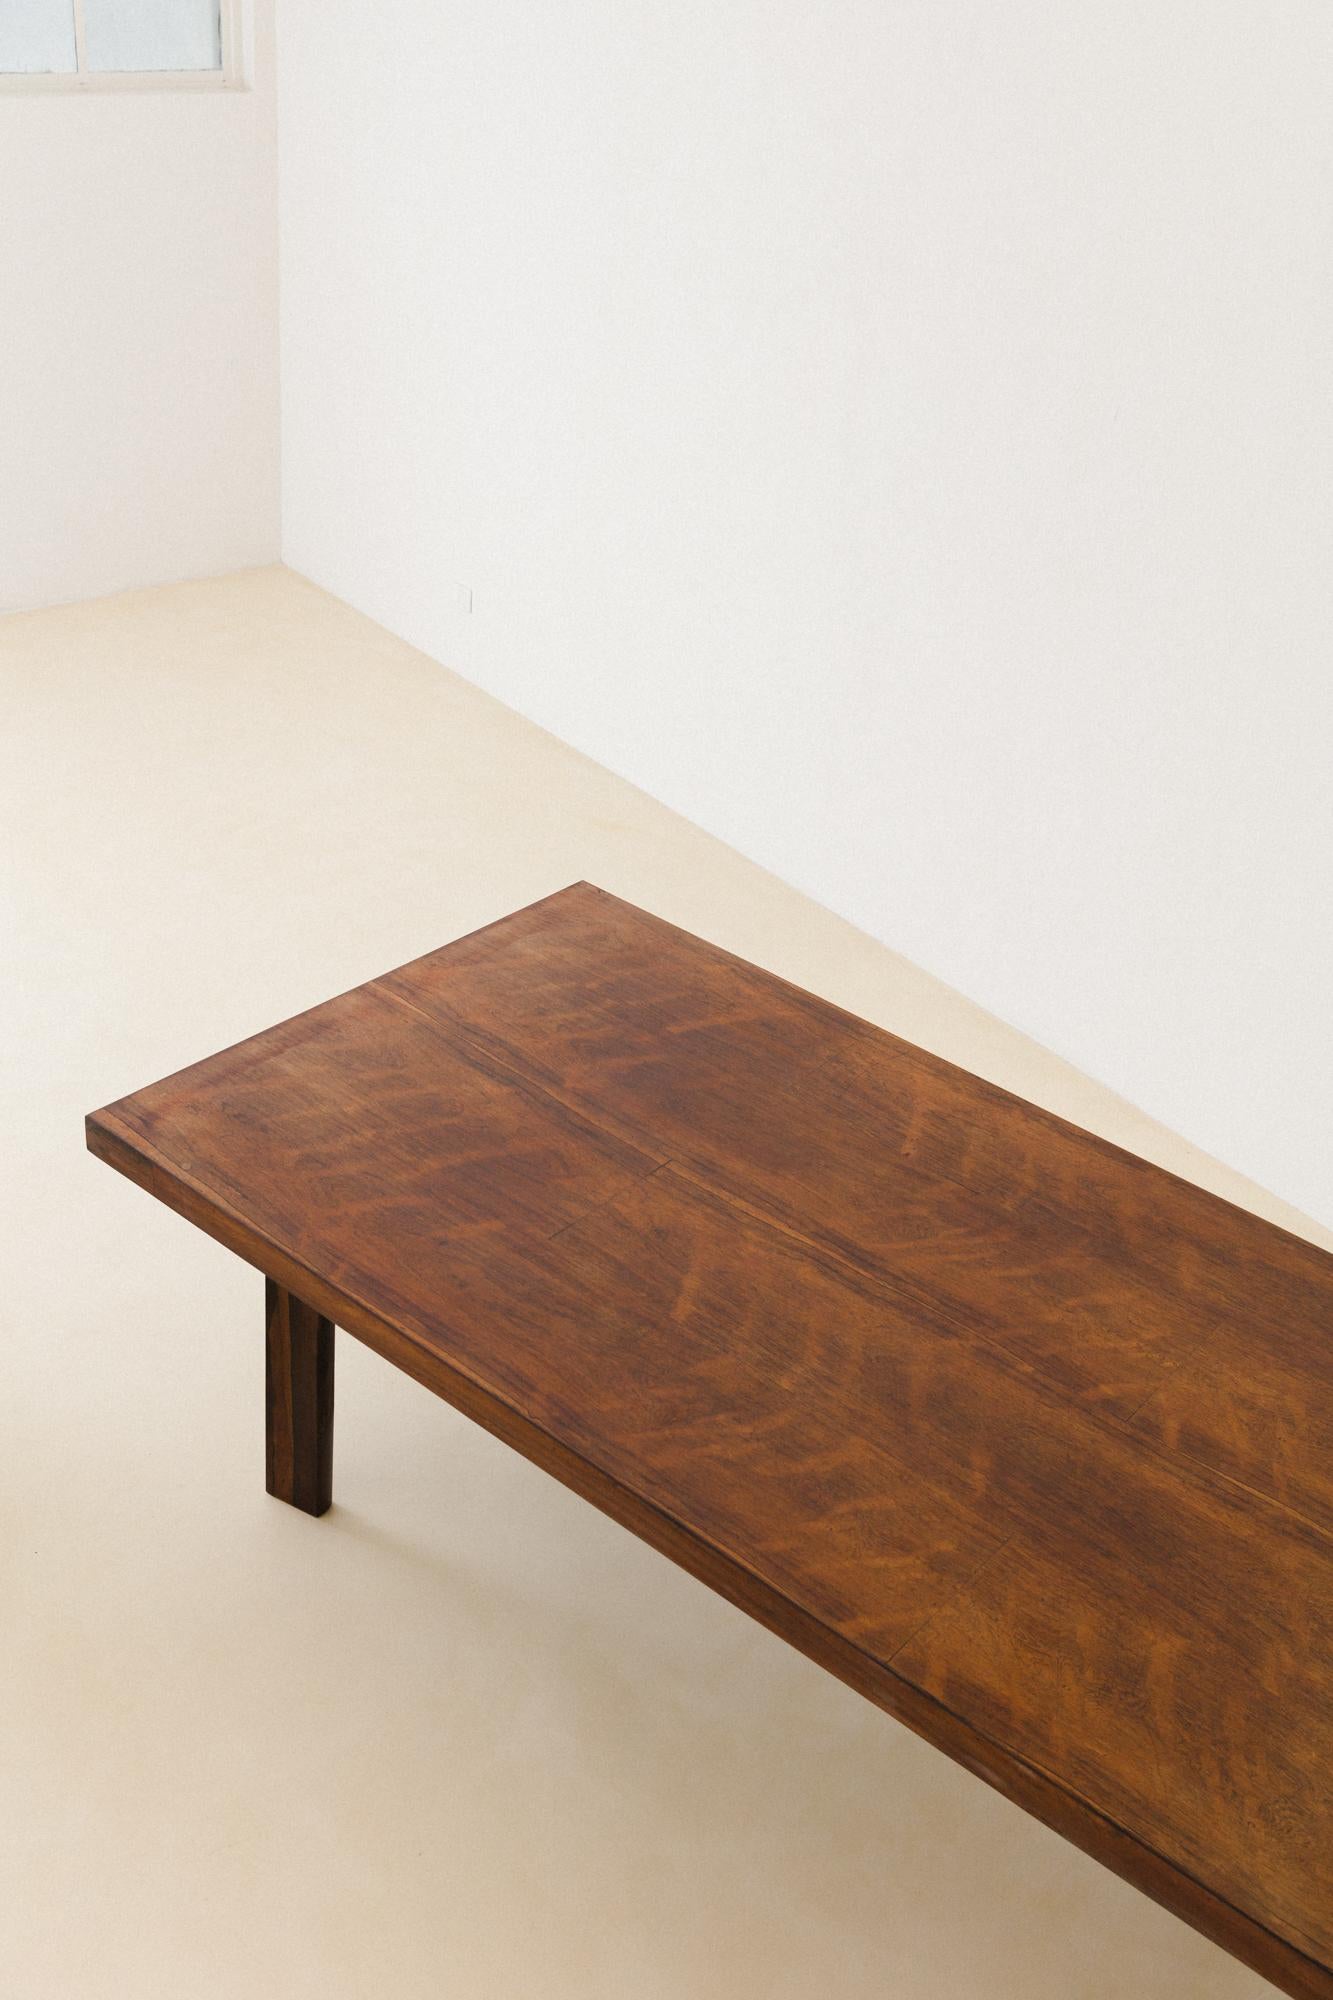 Brazilian Midcentury Dining Table in Rosewood, Unknown Designer, 1960s For Sale 4